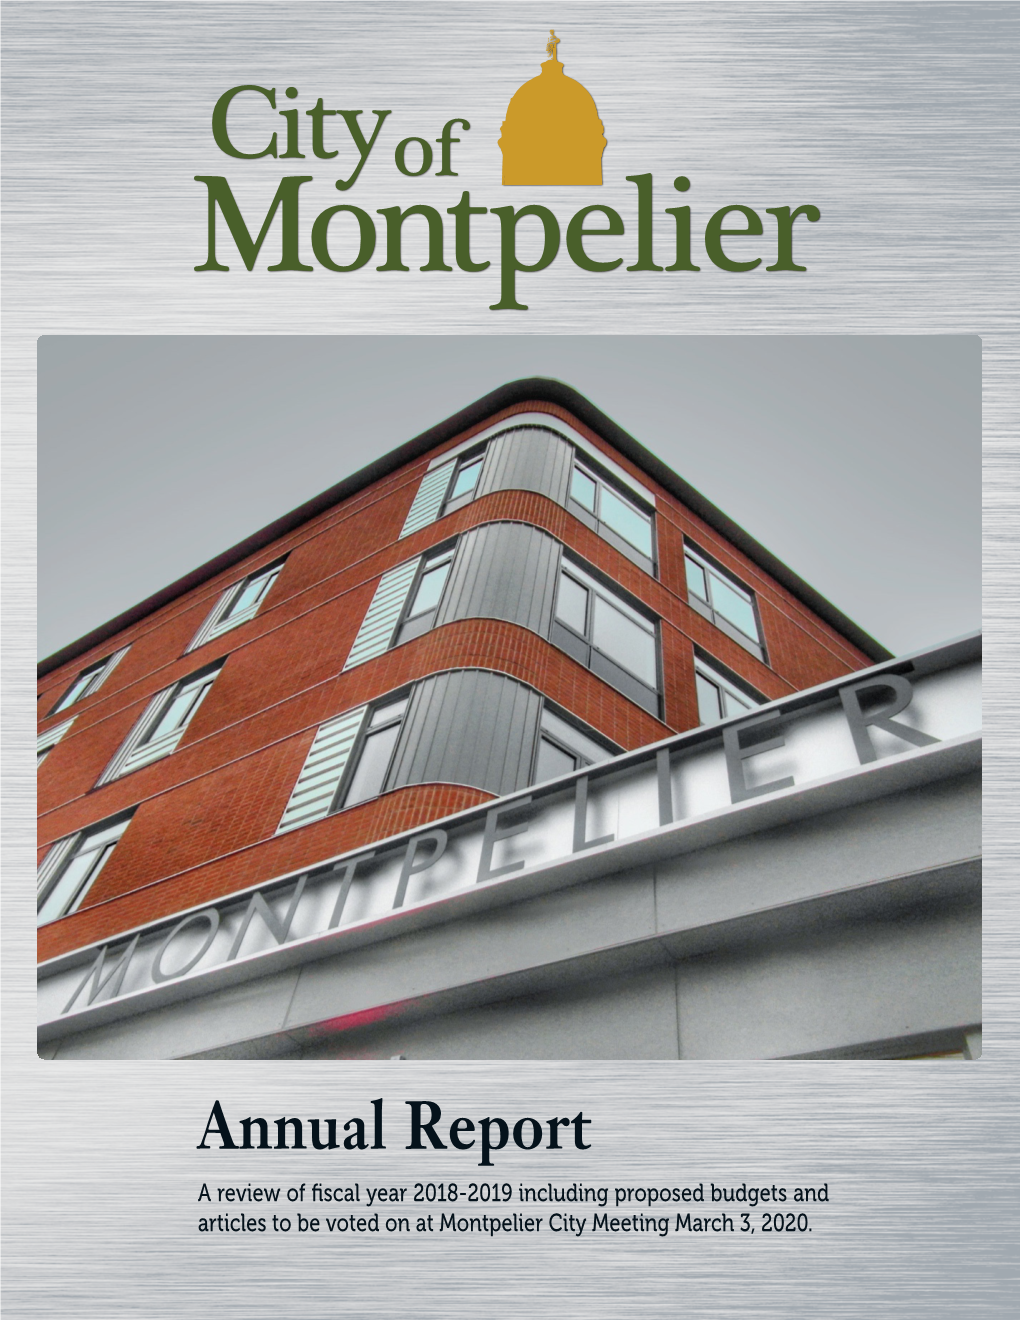 City of Montpelier Annual Report